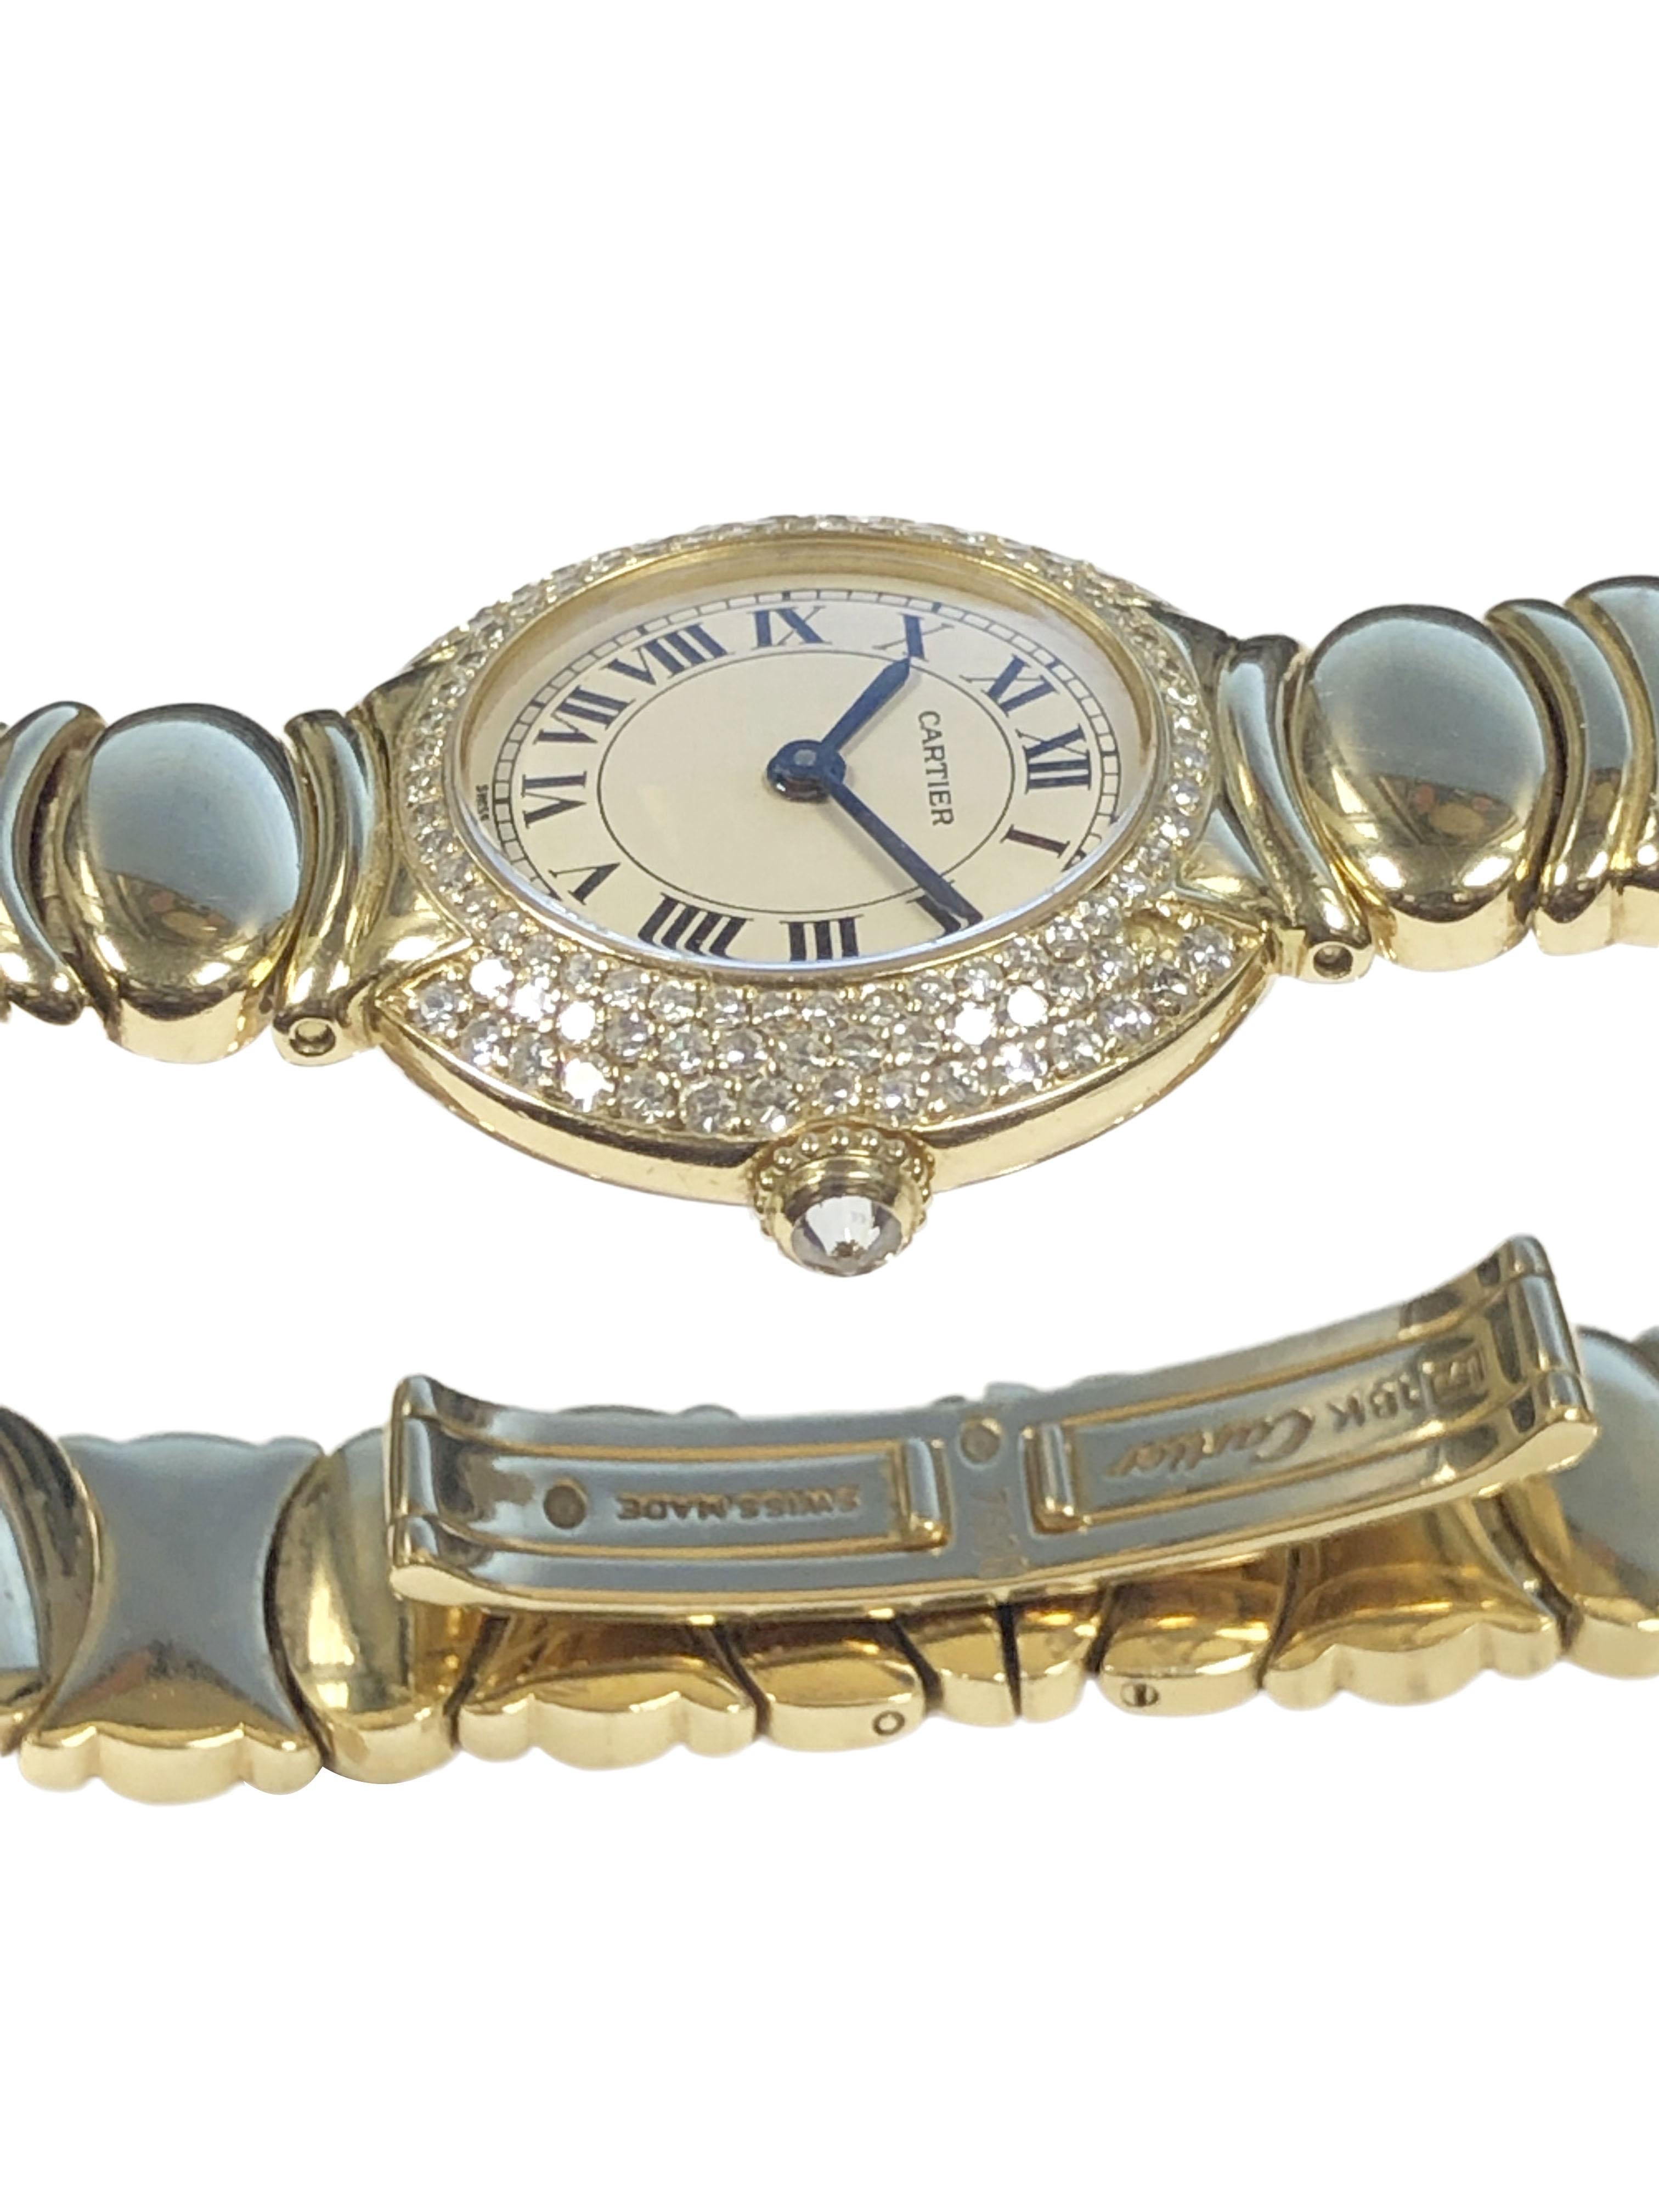 Circa 1990 Cartier Reference WN100207 Vendome Boutique Ladies Wrist watch, 26 X 25 M.M. 18k Yellow Gold 2 piece water resistant case set with 107 Round Brilliant cut Diamonds totaling 1.03 Carats. 1/2 inch wide Casque d'or Bracelet with fold over